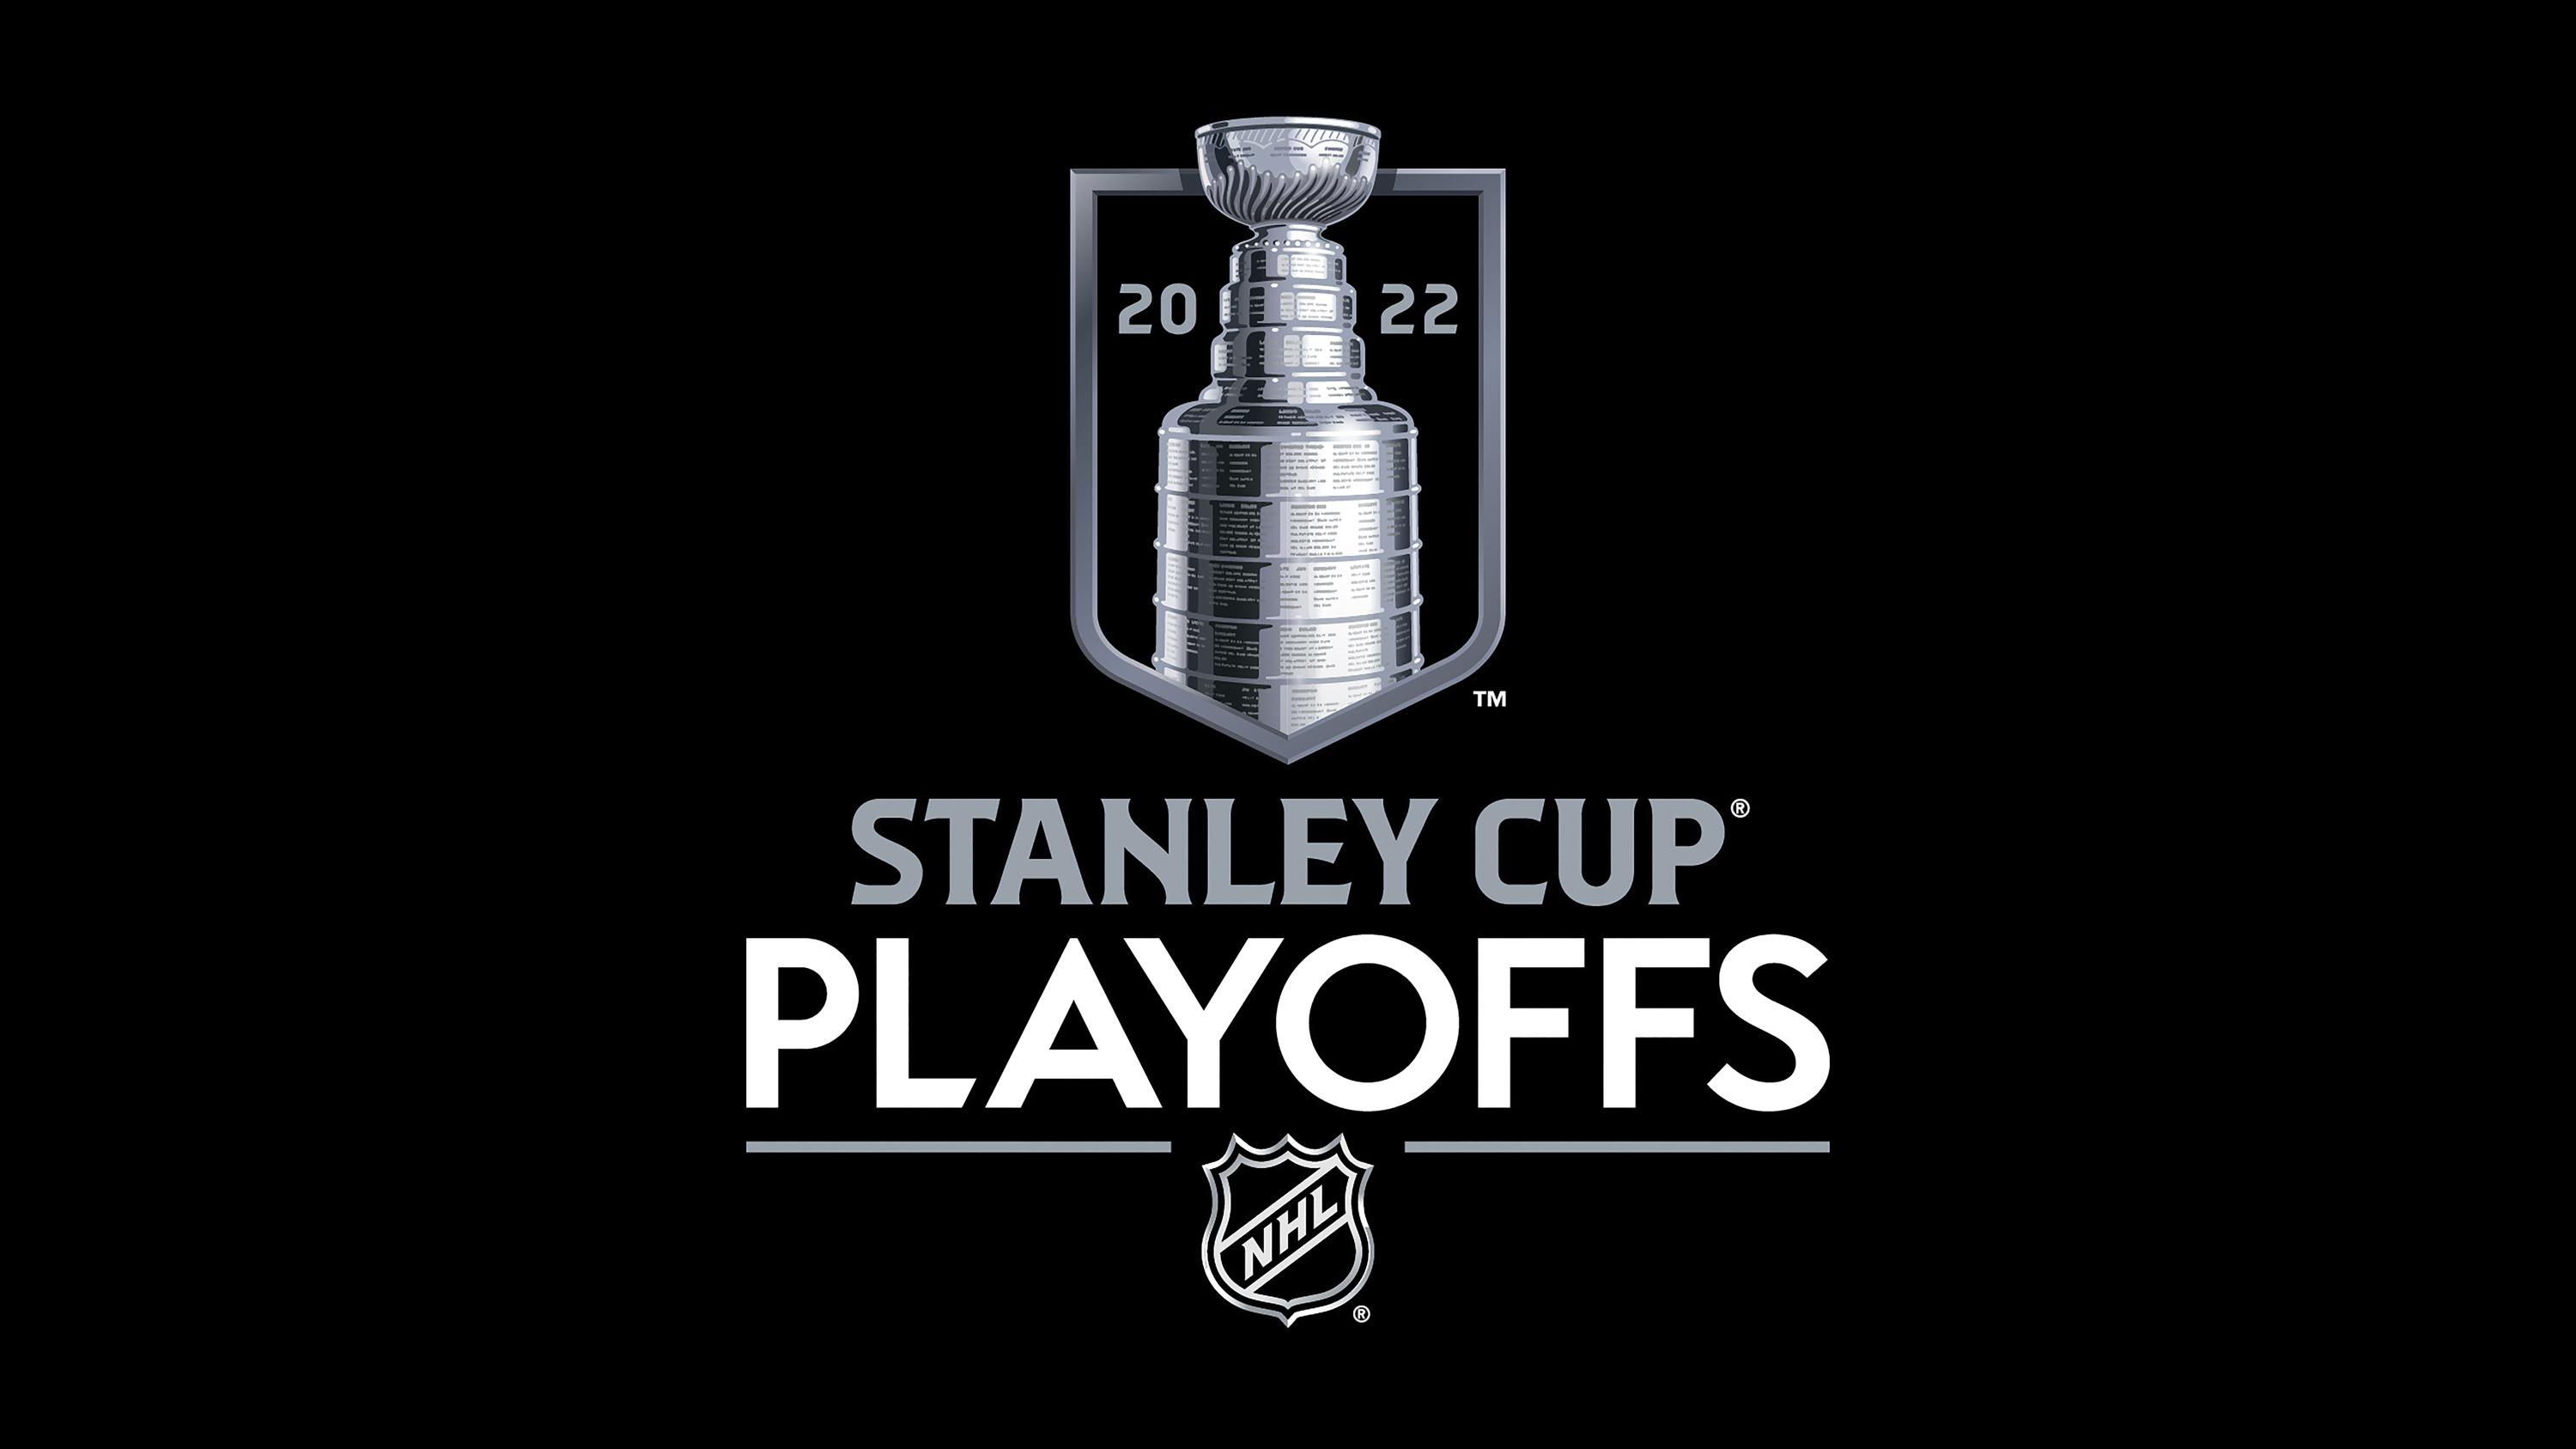 NHL unveils new logo for Stanley Cup playoffs and Final | AP News